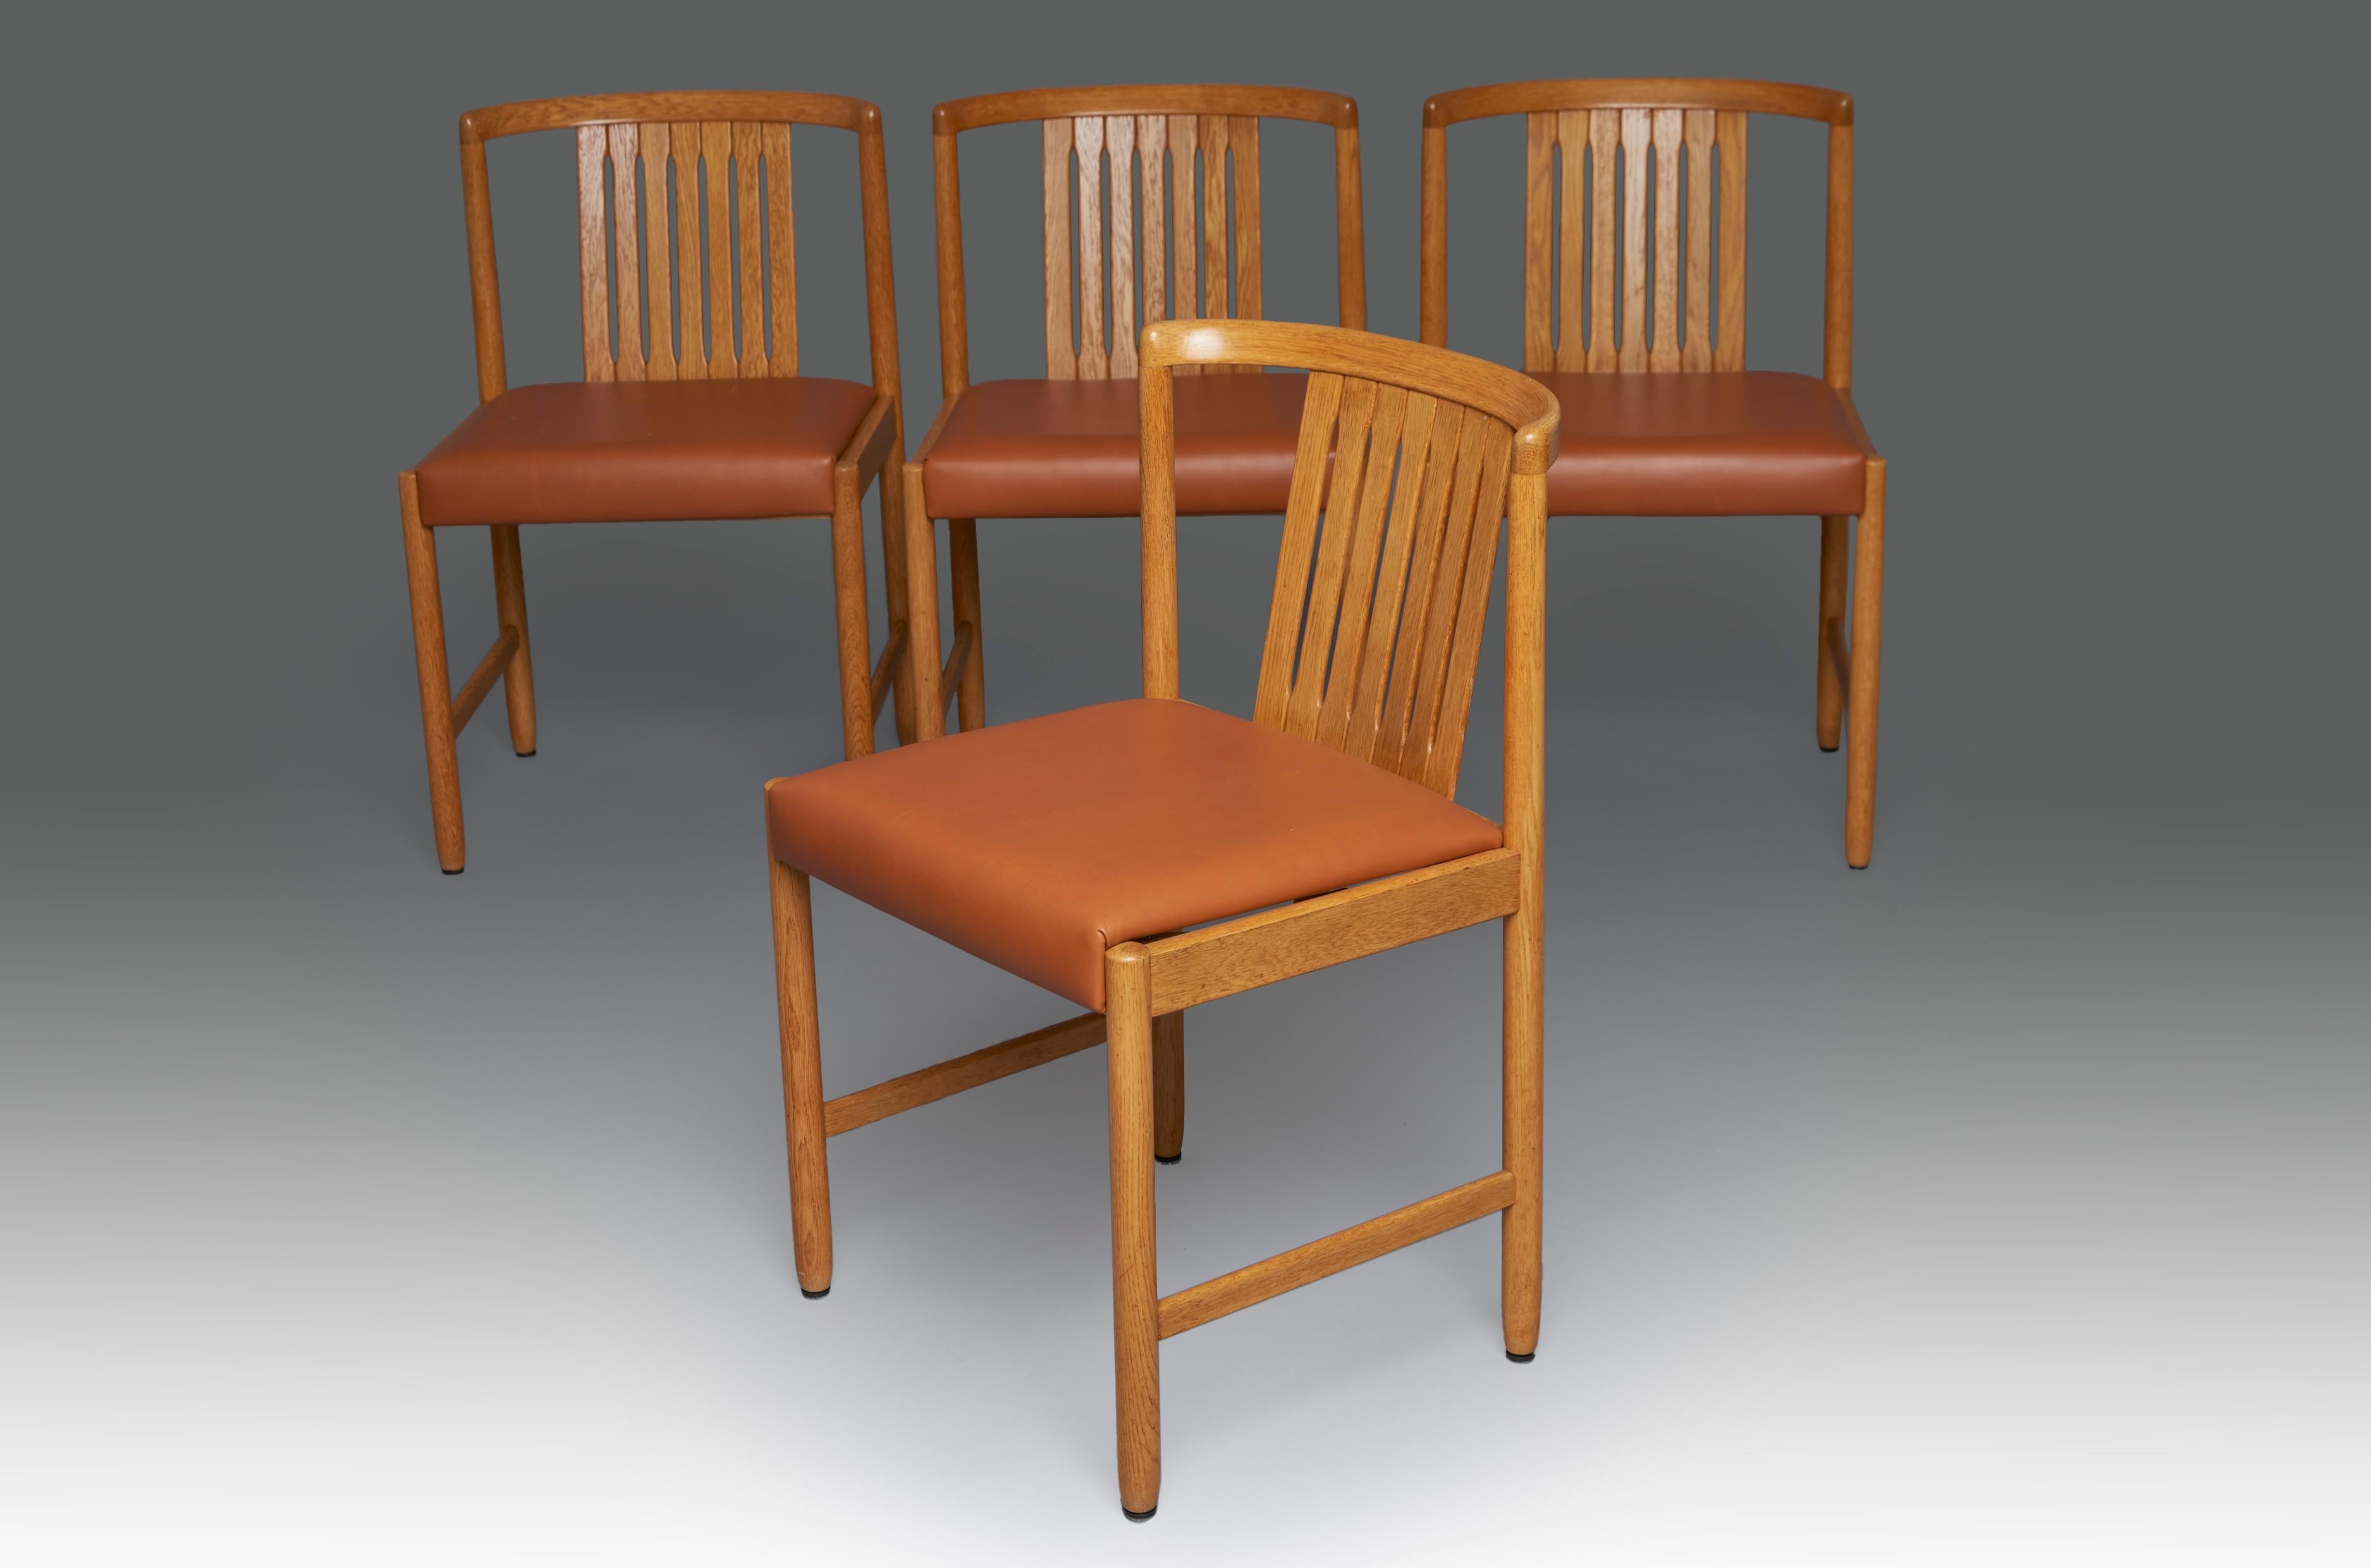 Set of four chairs in teak and tan leather designed by Bertil Fridhagen for Bodafors. Sweden, 1960s.

Perfect condition, restored and reupholstered. the pictures only show 4 of the 6 units available

Bertil Fridhagen was a swedish Architect and